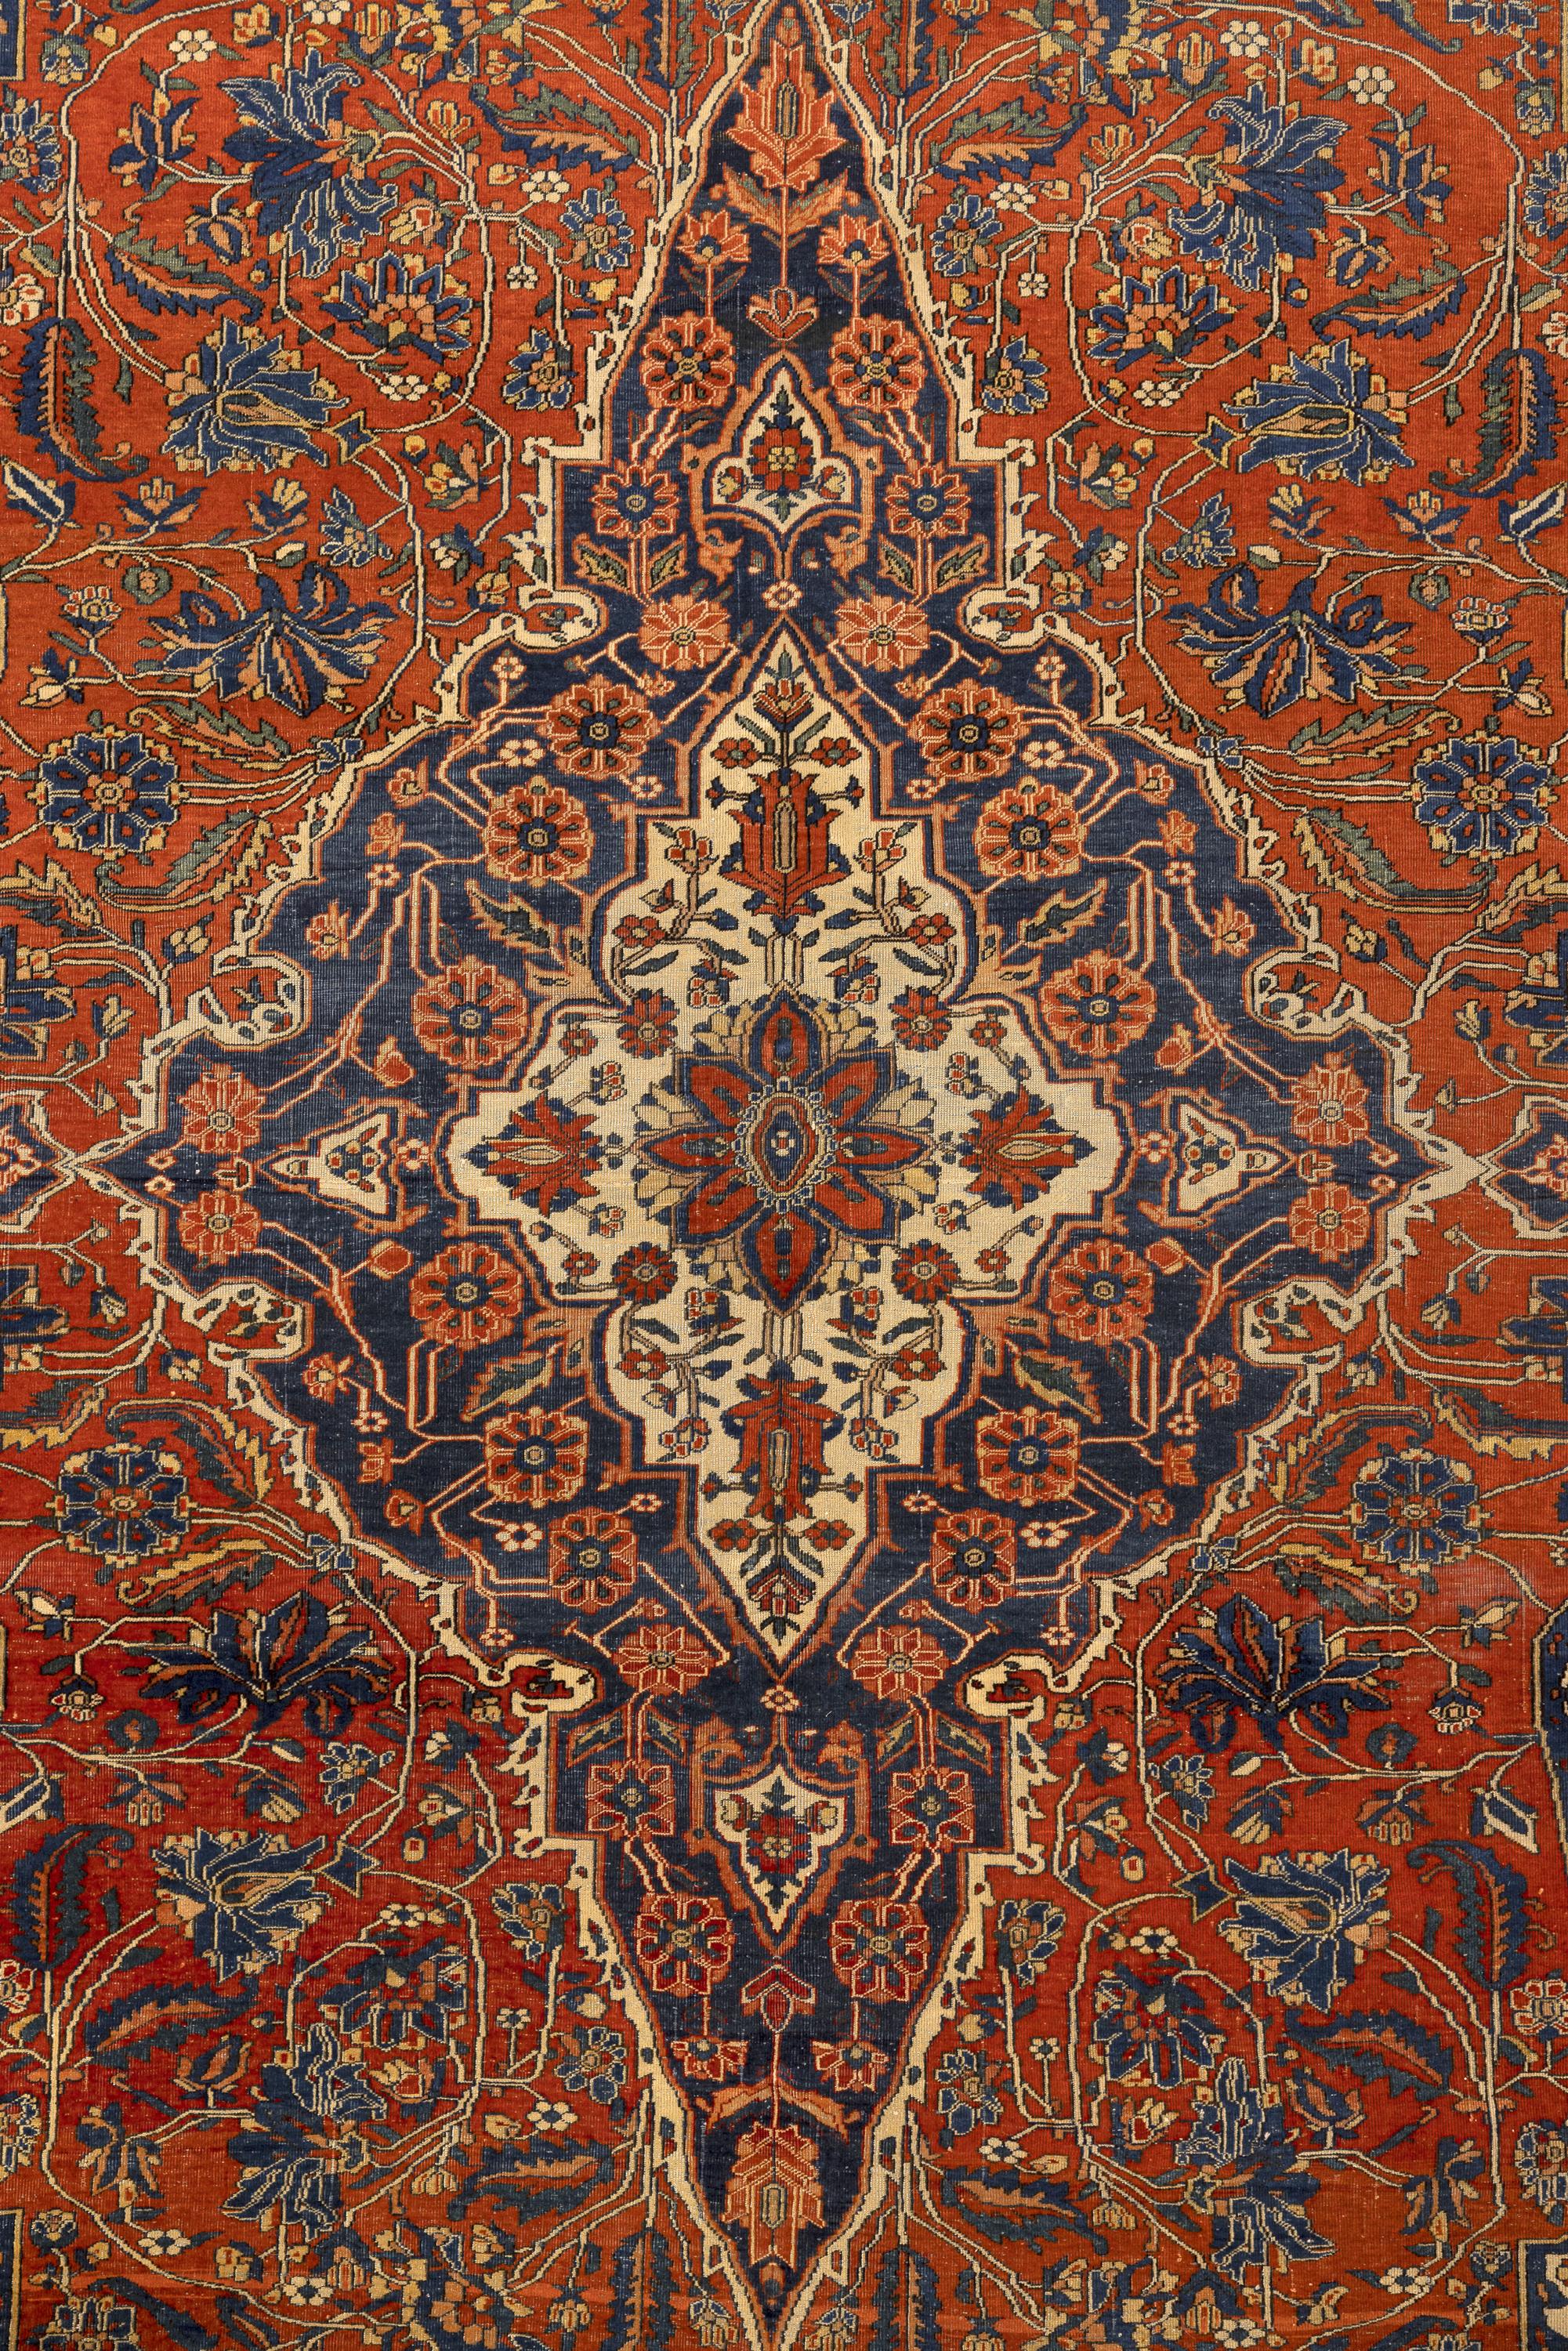 Mohtasham Kashan – Central Persia

With a shiny surface made of lambswool and a wonderful pile, this resplendent Mohtasham Kashan results from technical perfection and the artistic expression of unrivalled sumptuousness. Designed in high definition,